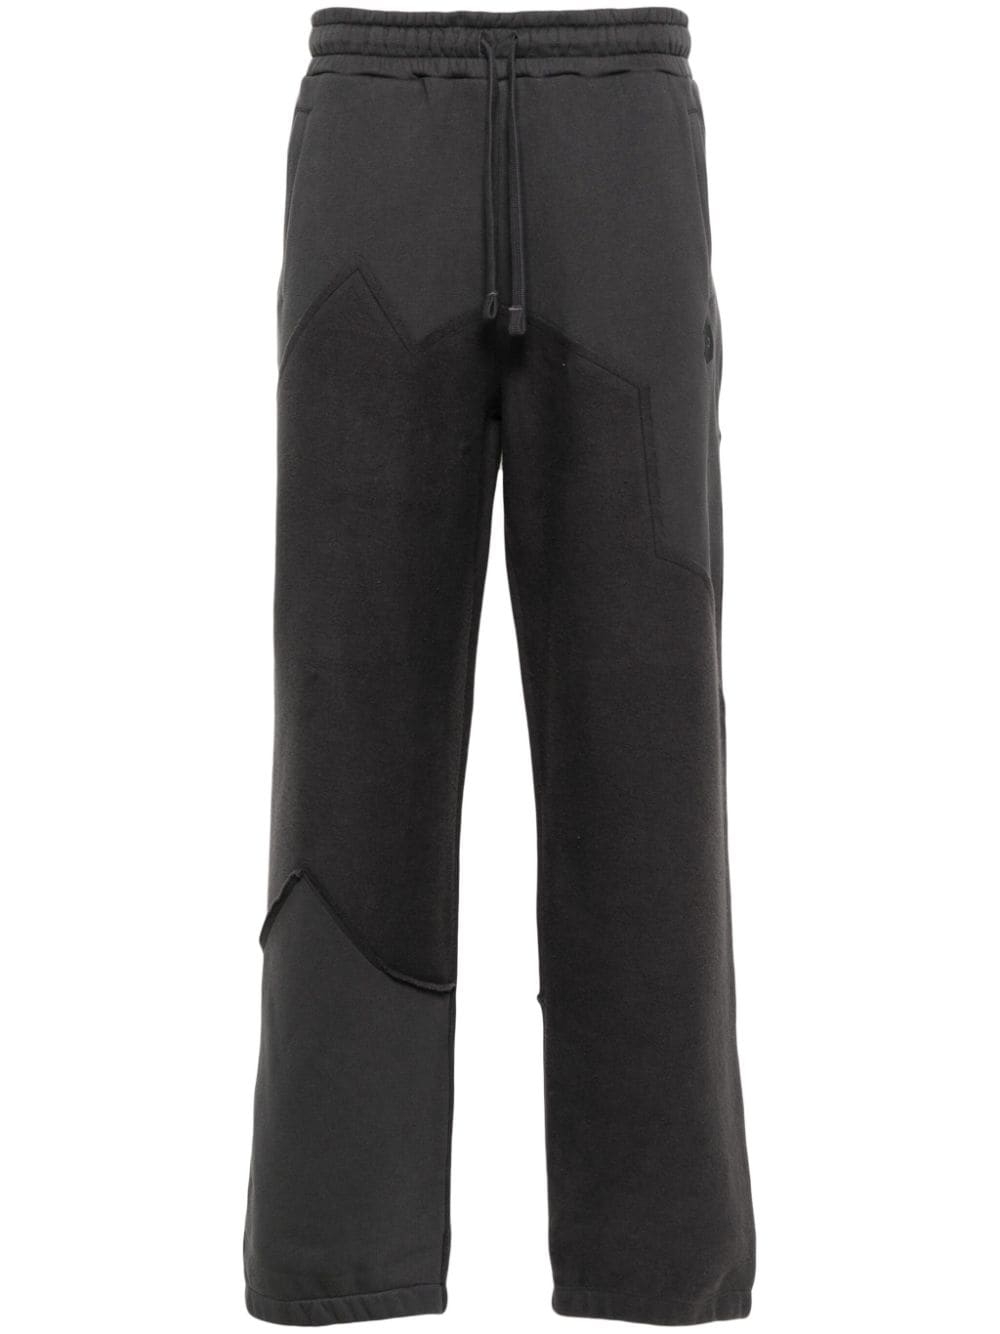 OBJECTS IV LIFE Thought Bubble panelled track pants - Grey von OBJECTS IV LIFE